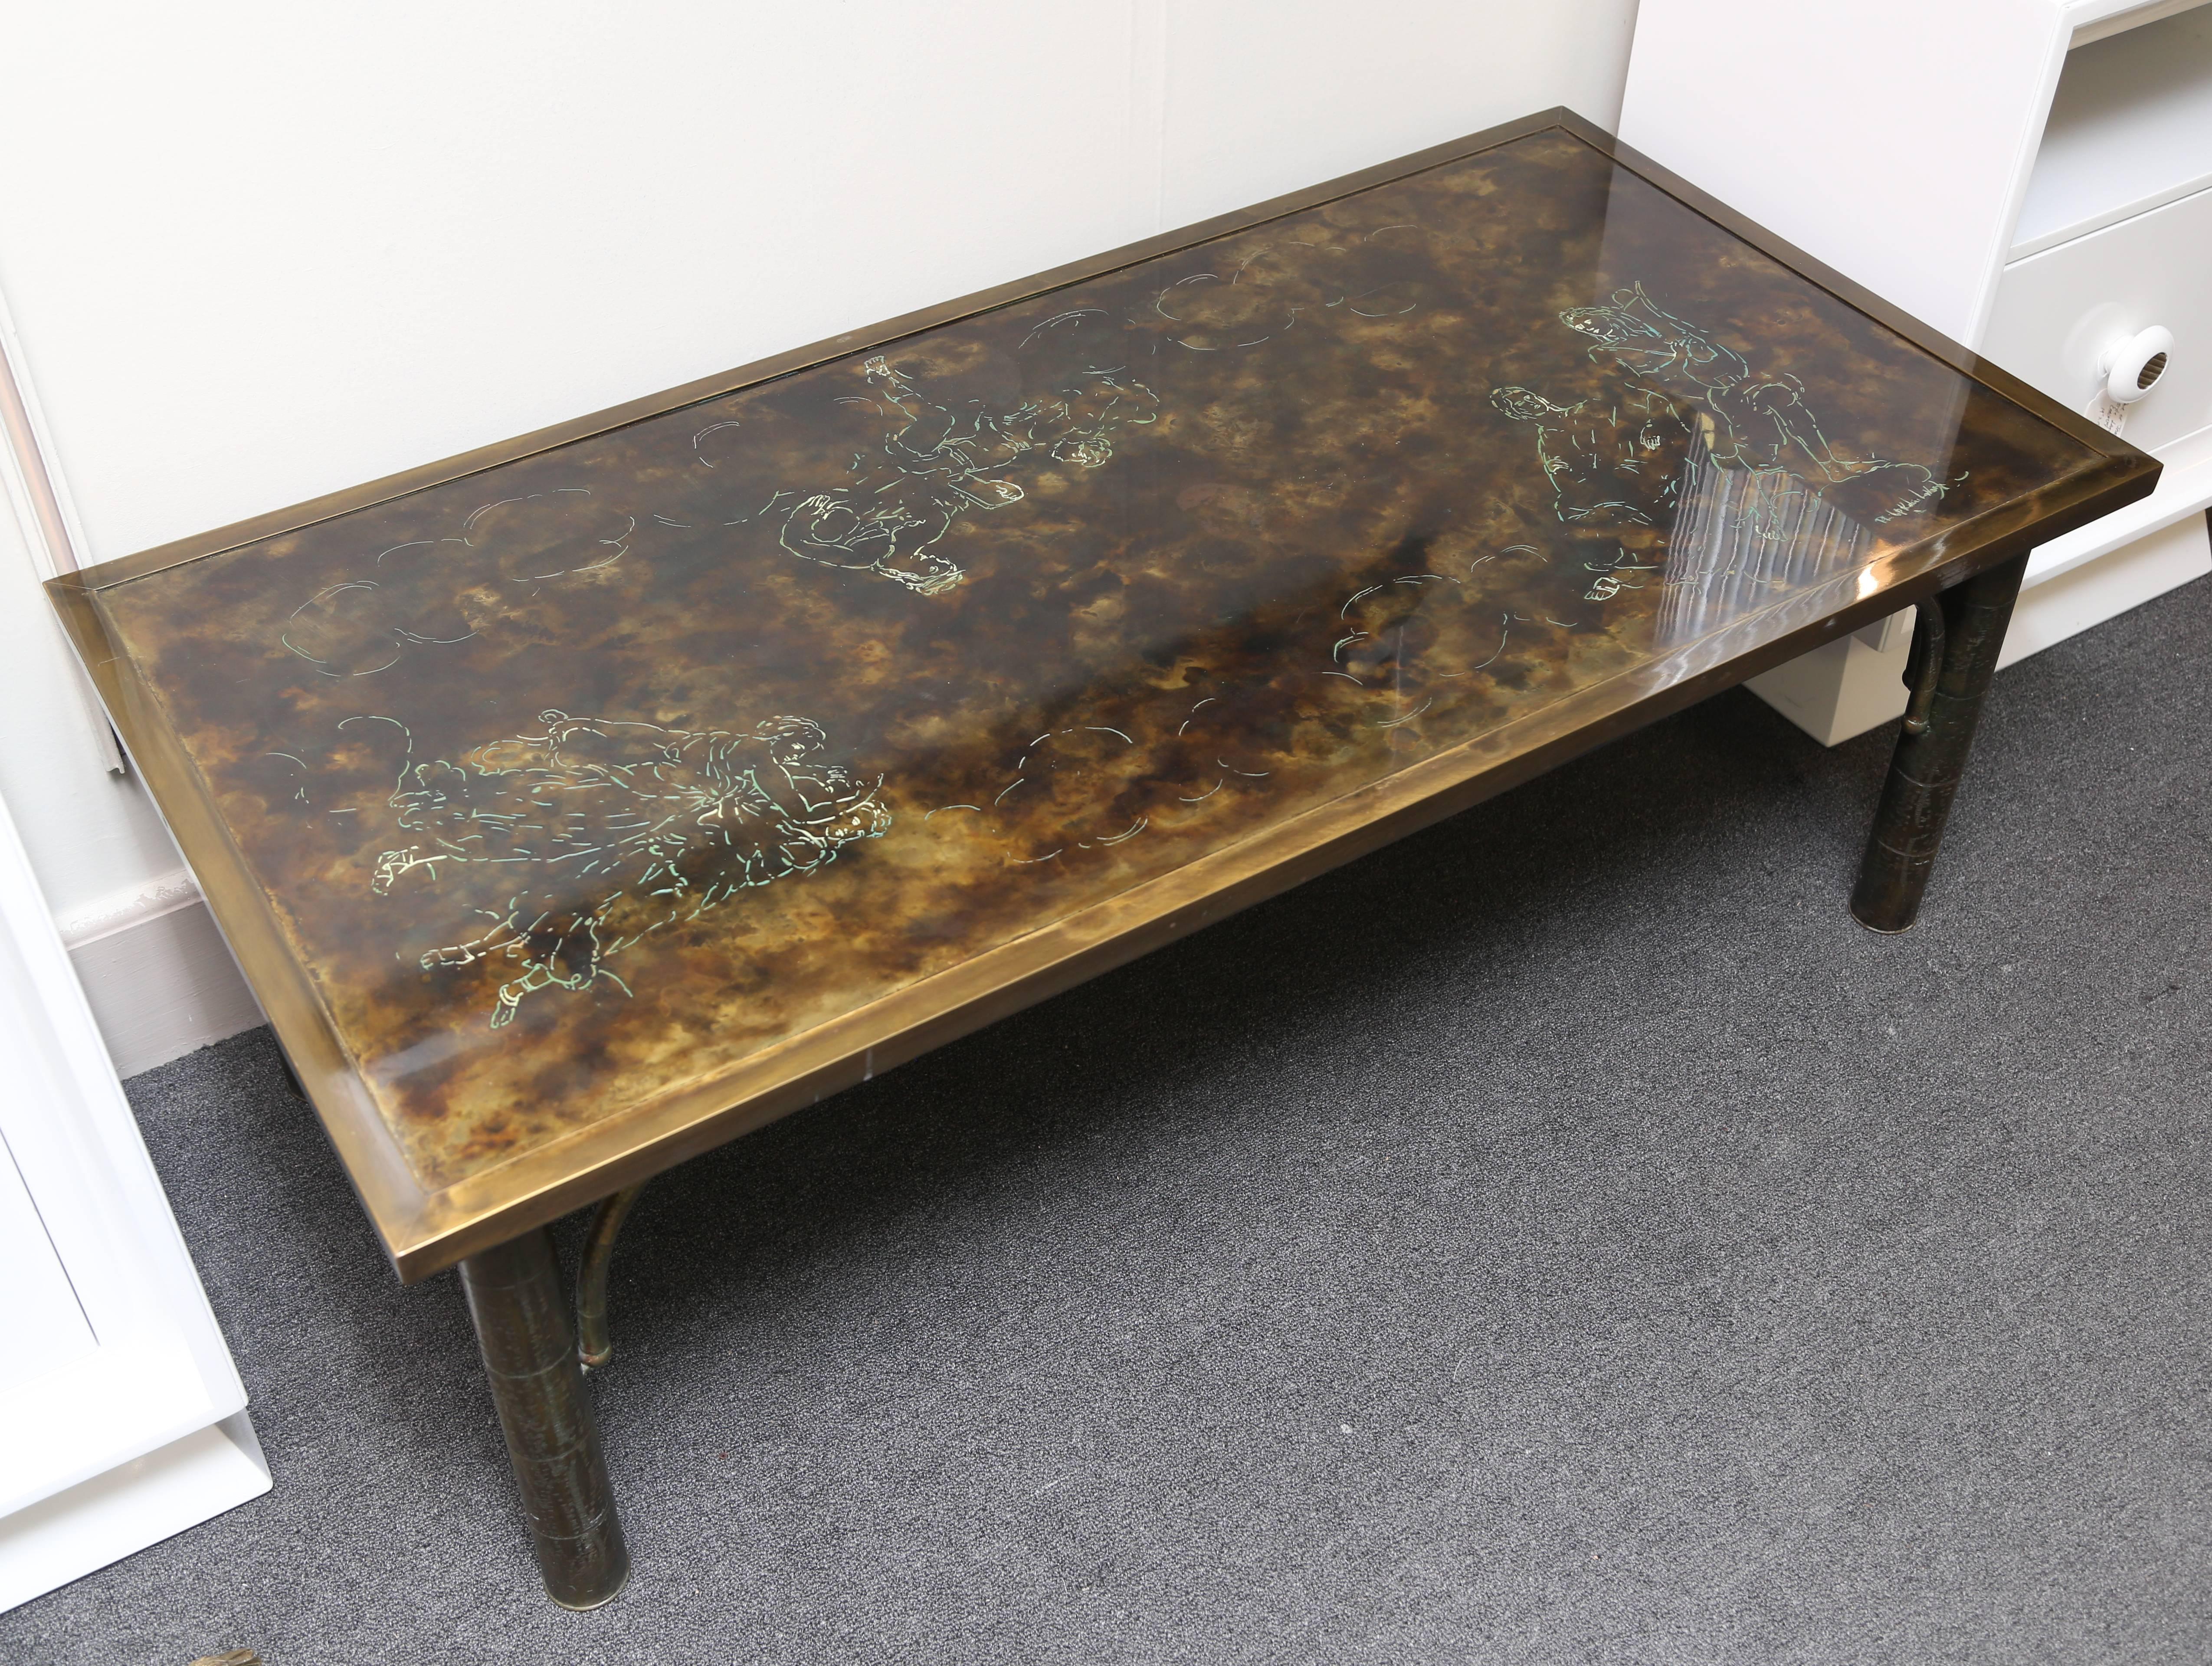 Superb quality and condition. Vibrant color and "mirror" like finish raised upon faux bamboo style legs.